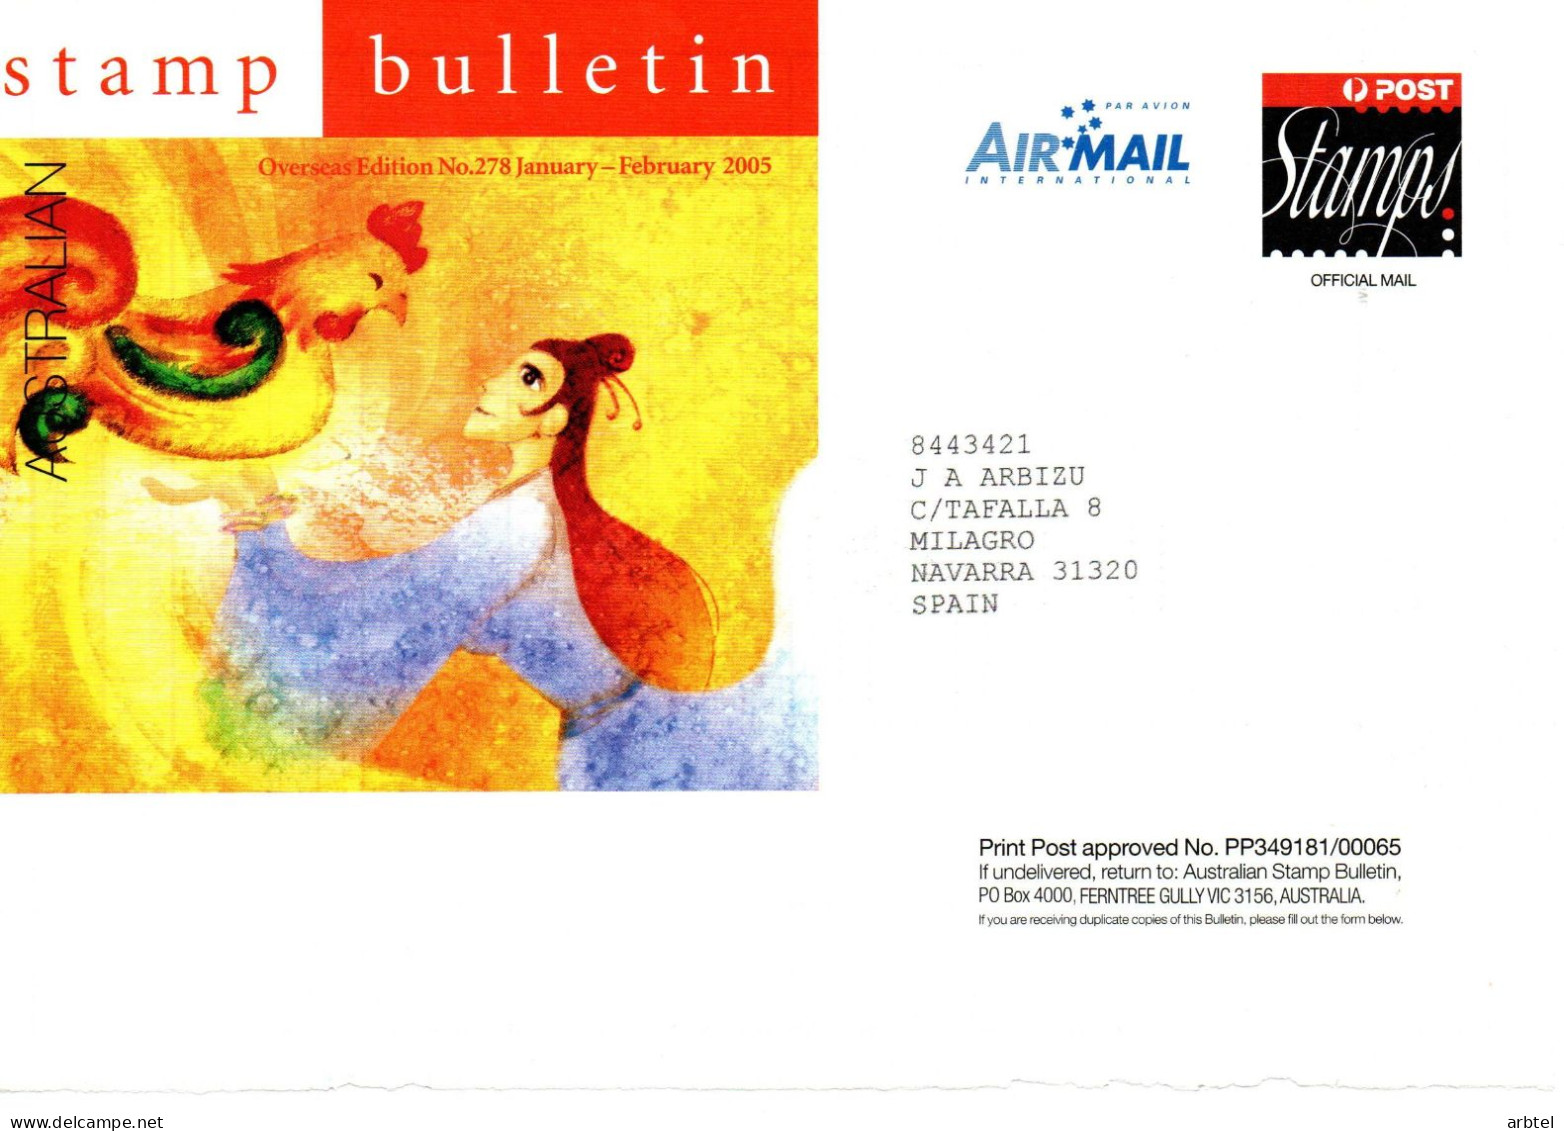 AUSTRALIA STAMP BULLETIN FRONTAL FRONT OFFICIAL MAIL 2005 ARTE GALLINA HEN - Gallinaceans & Pheasants